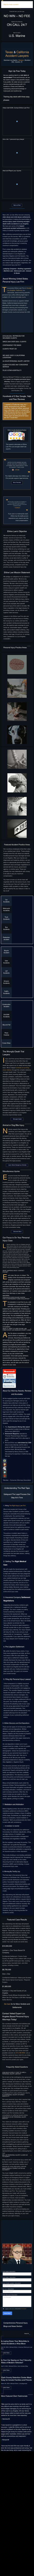 Ehline Law Firm Personal Injury Attorneys, APLC - San Francisco CA Lawyers